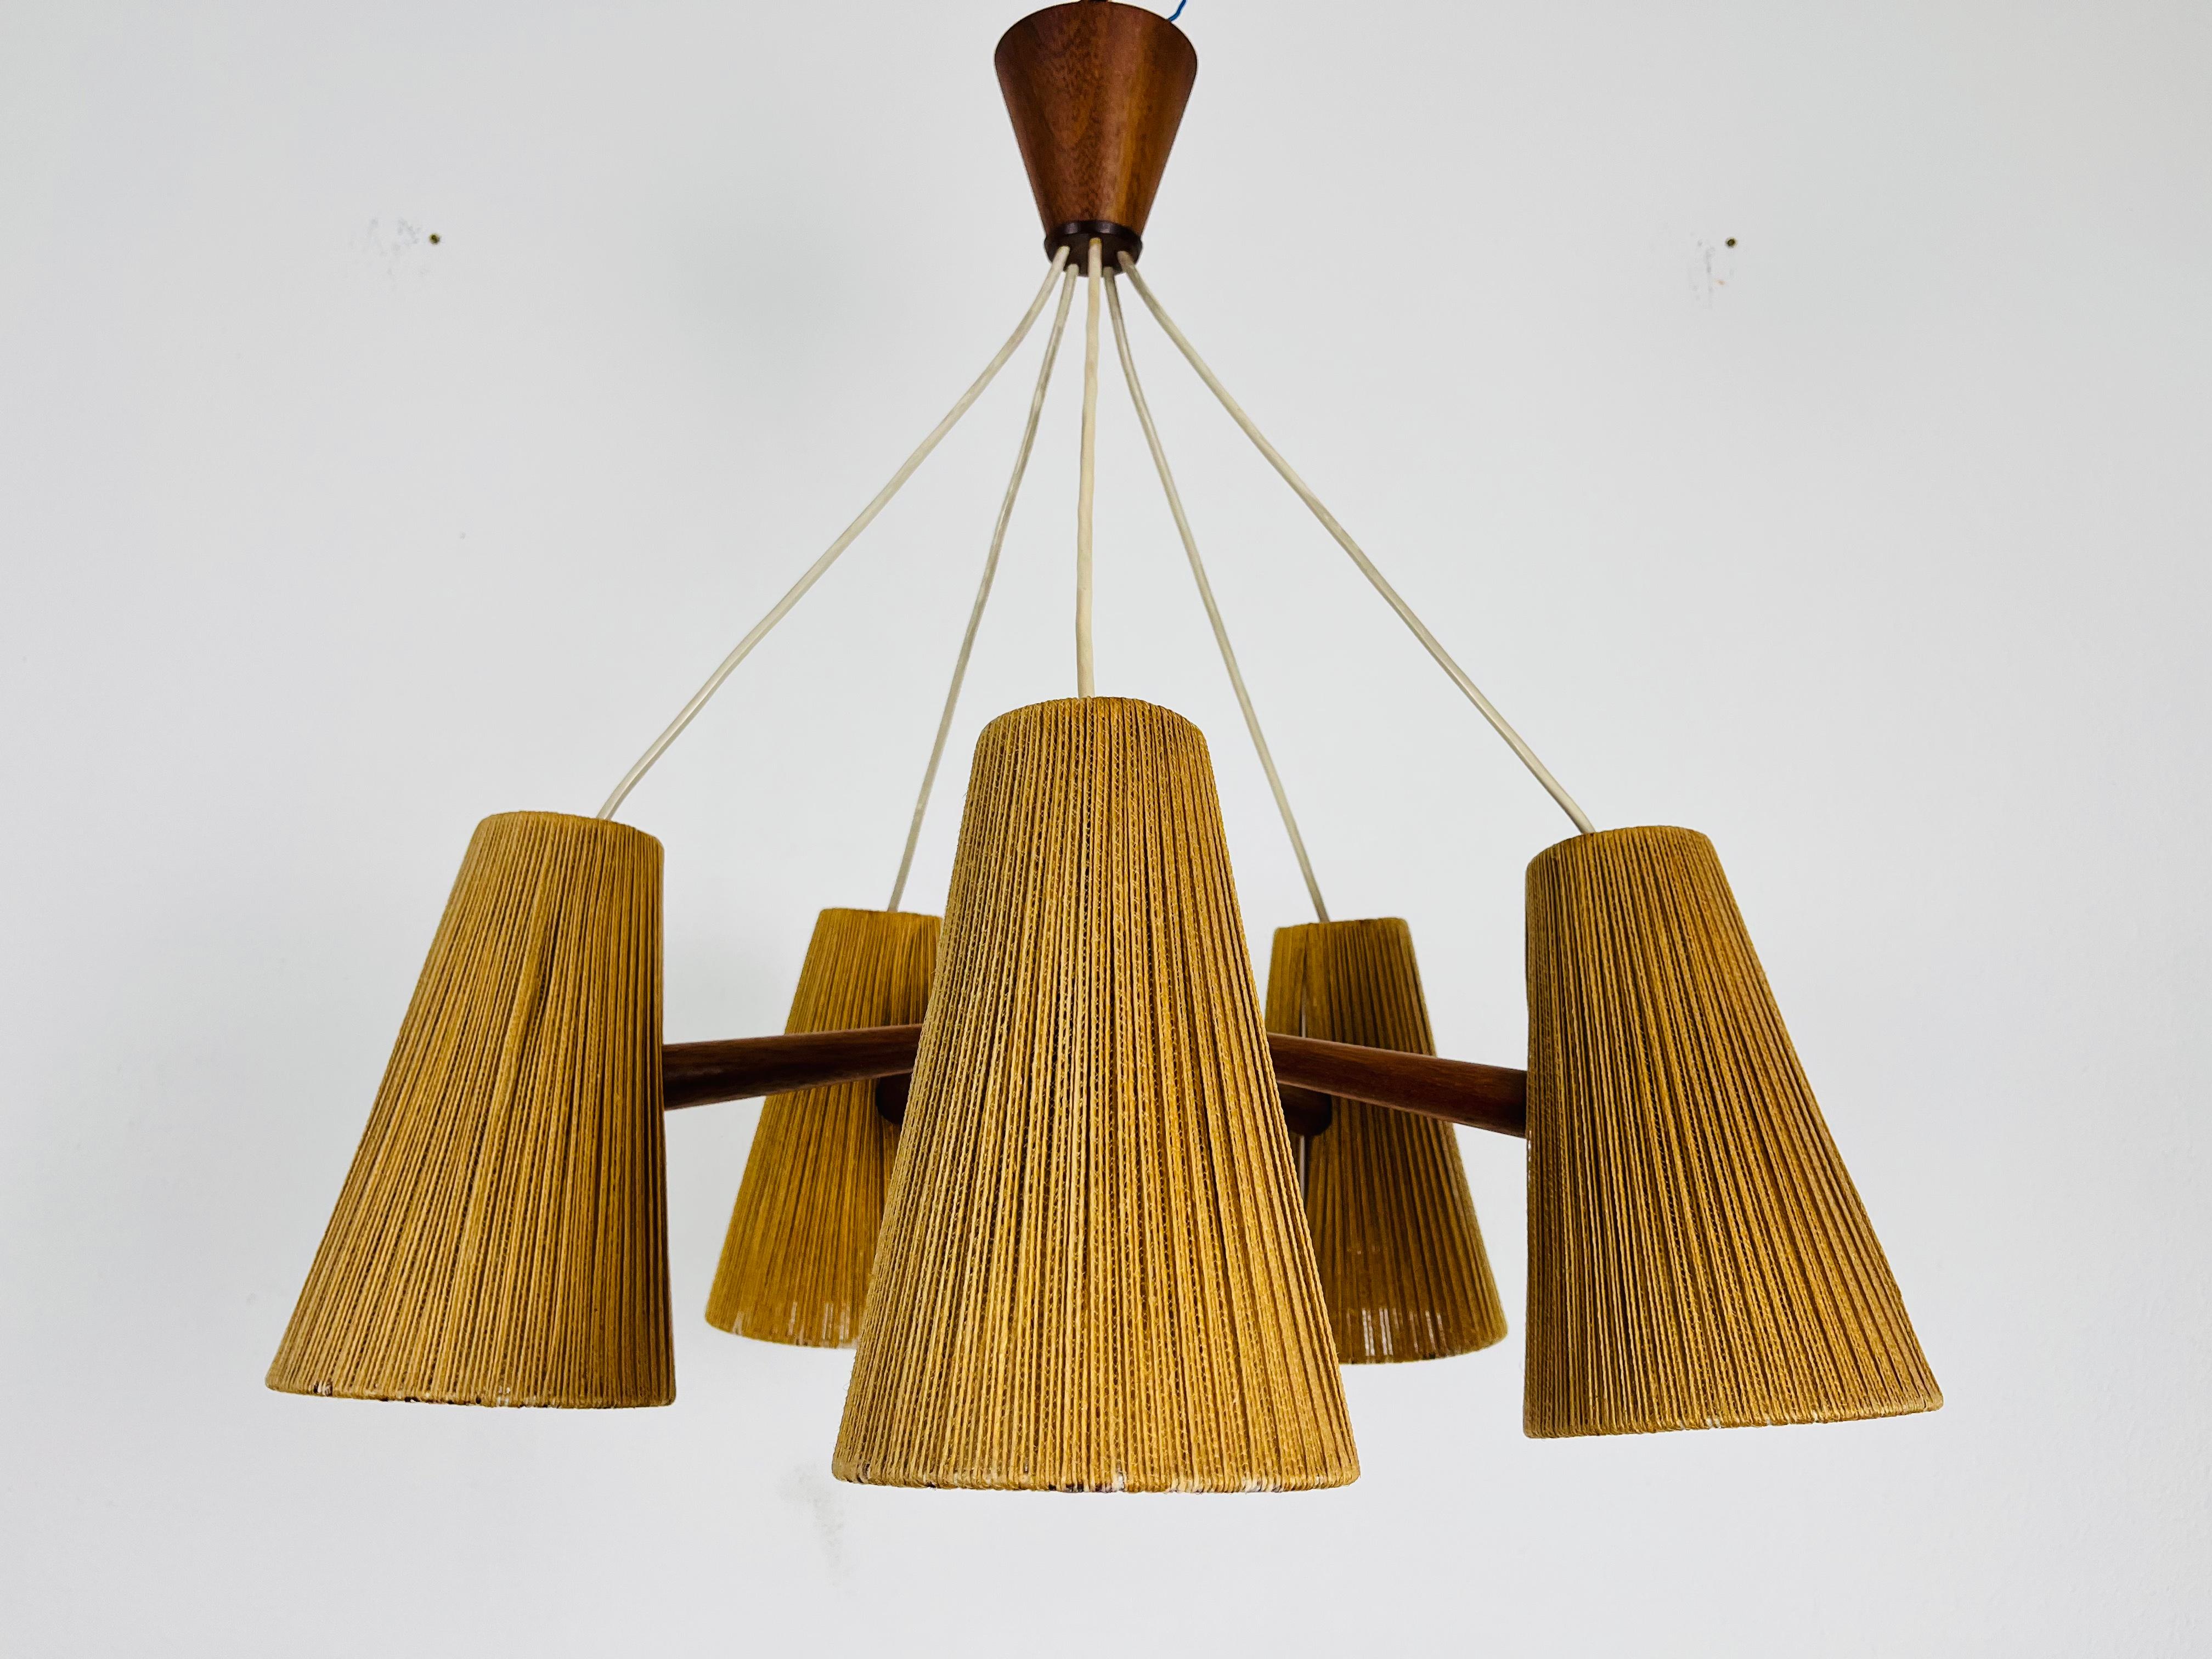 Mid-20th Century Midcentury Teak and Cord Shade Hanging Lamp by Temde, circa 1960